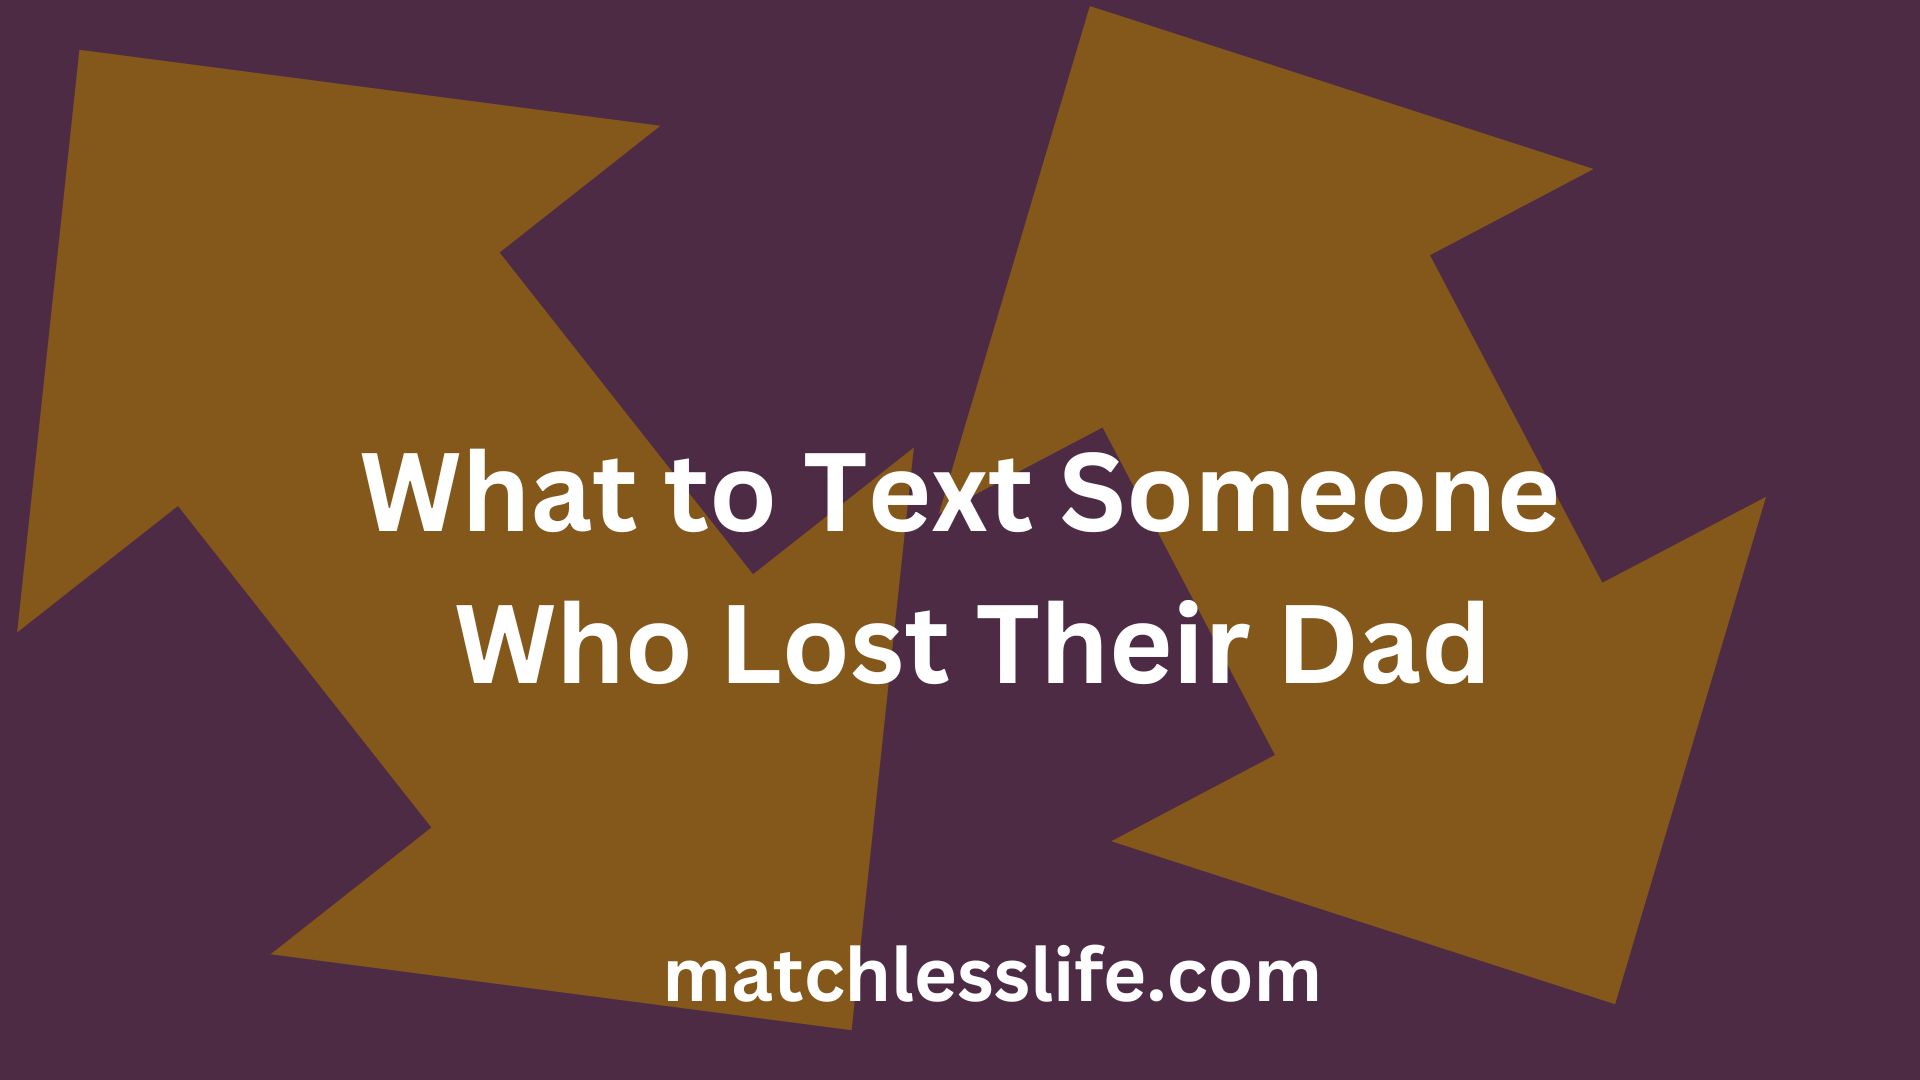 What to Text Someone Who Lost Their Dad